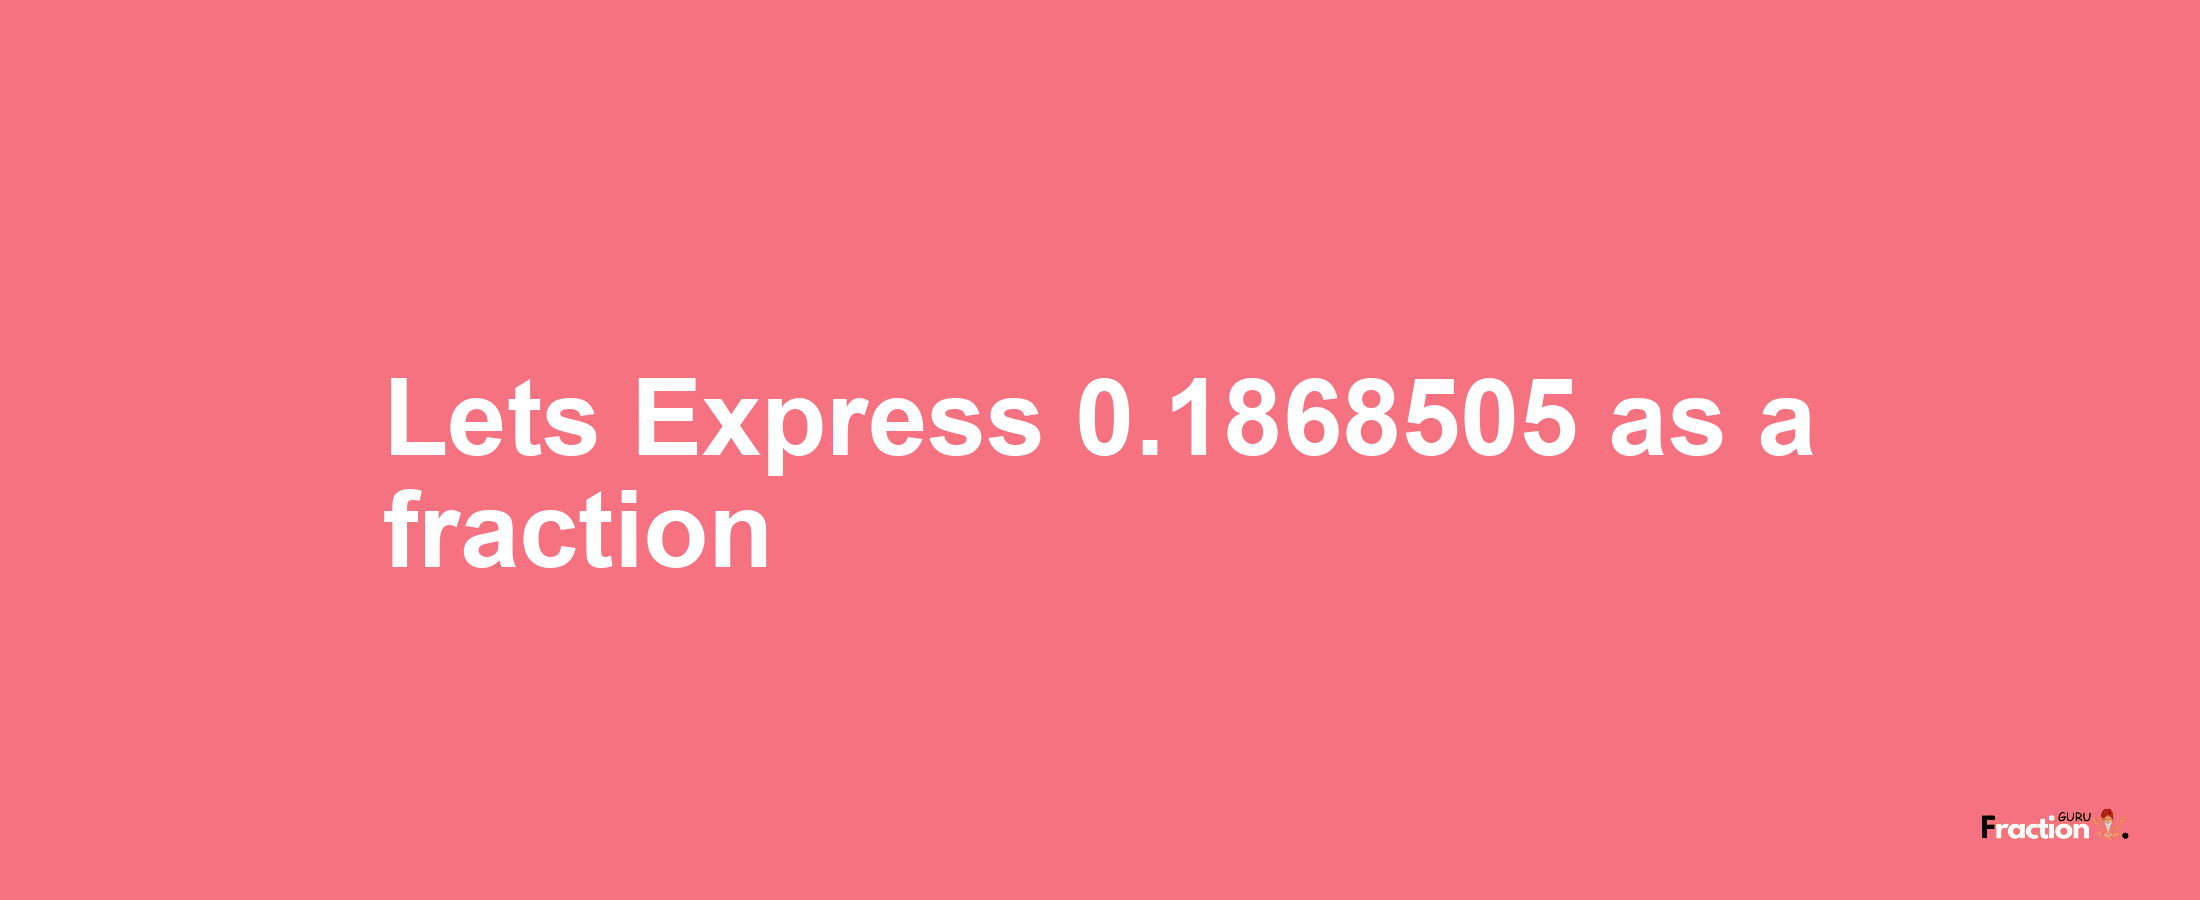 Lets Express 0.1868505 as afraction